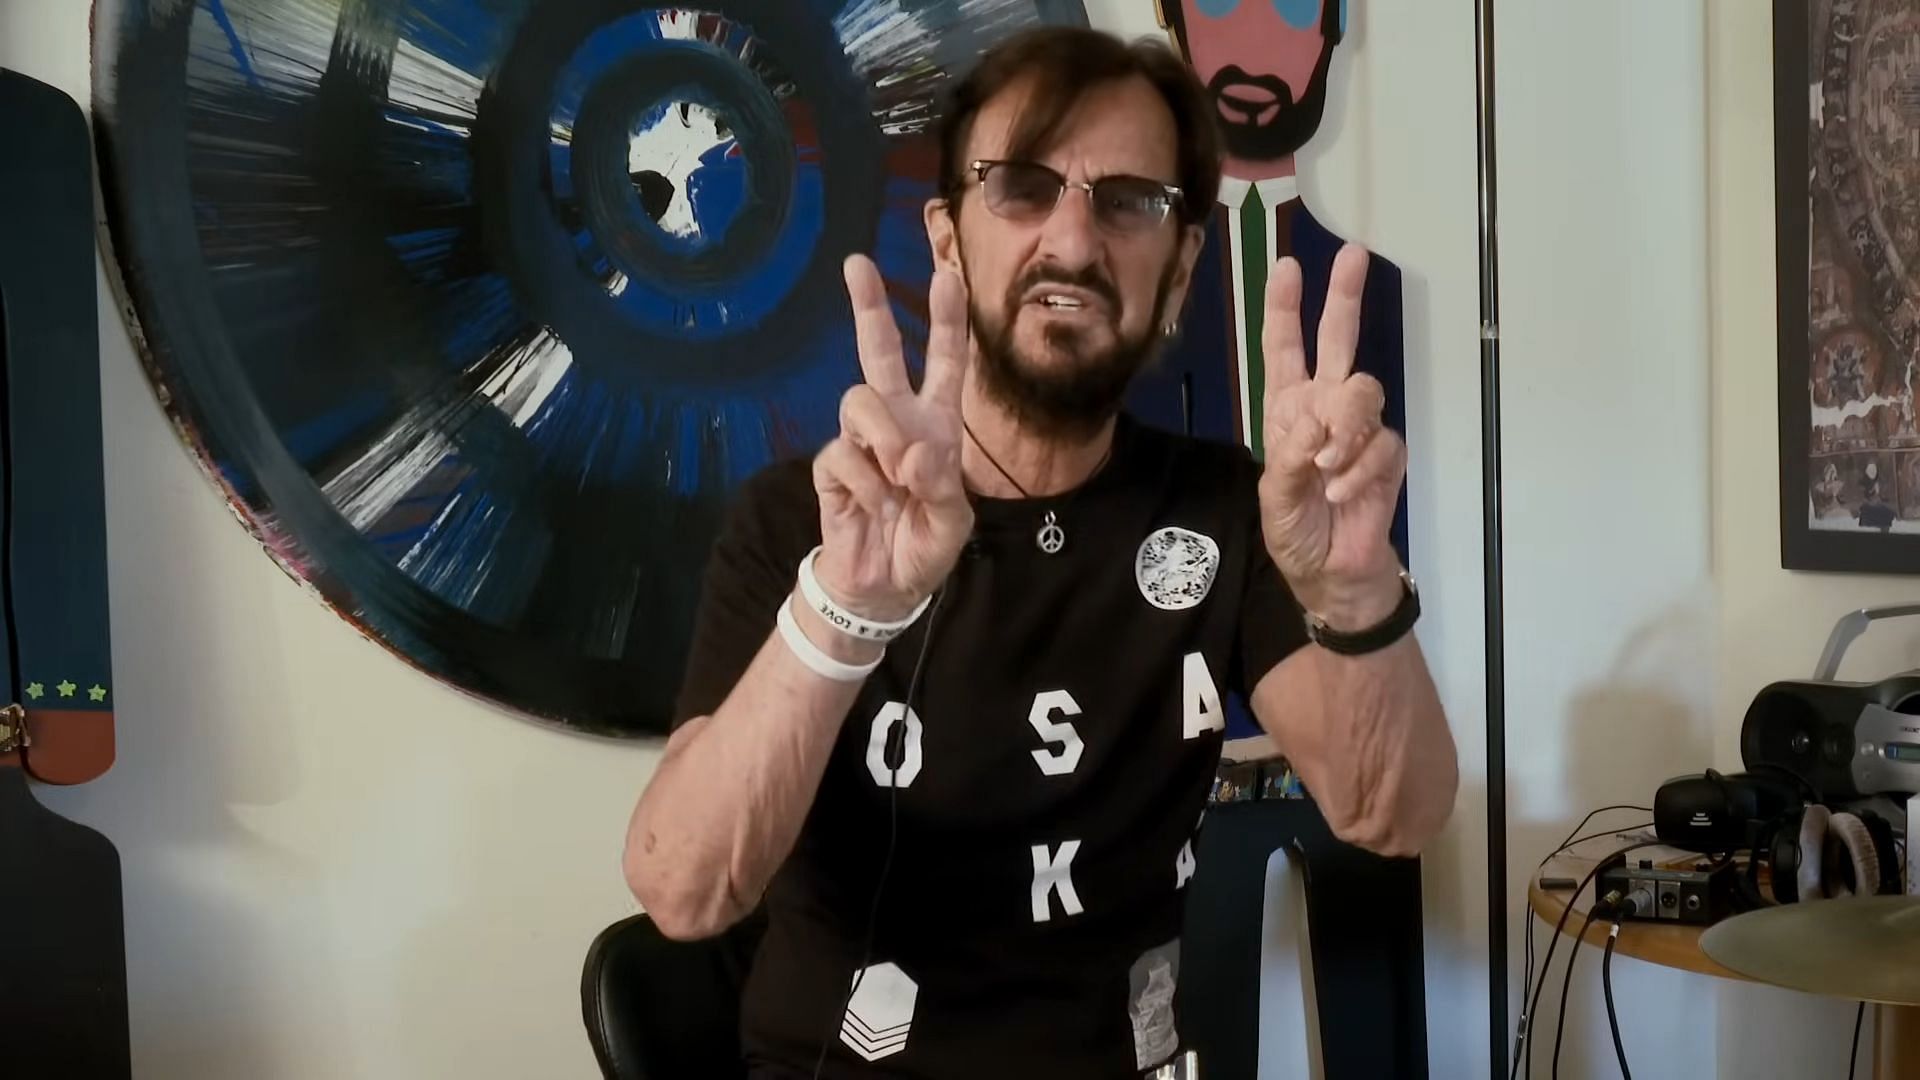 Ringo Starr opened up about Paul McCartney